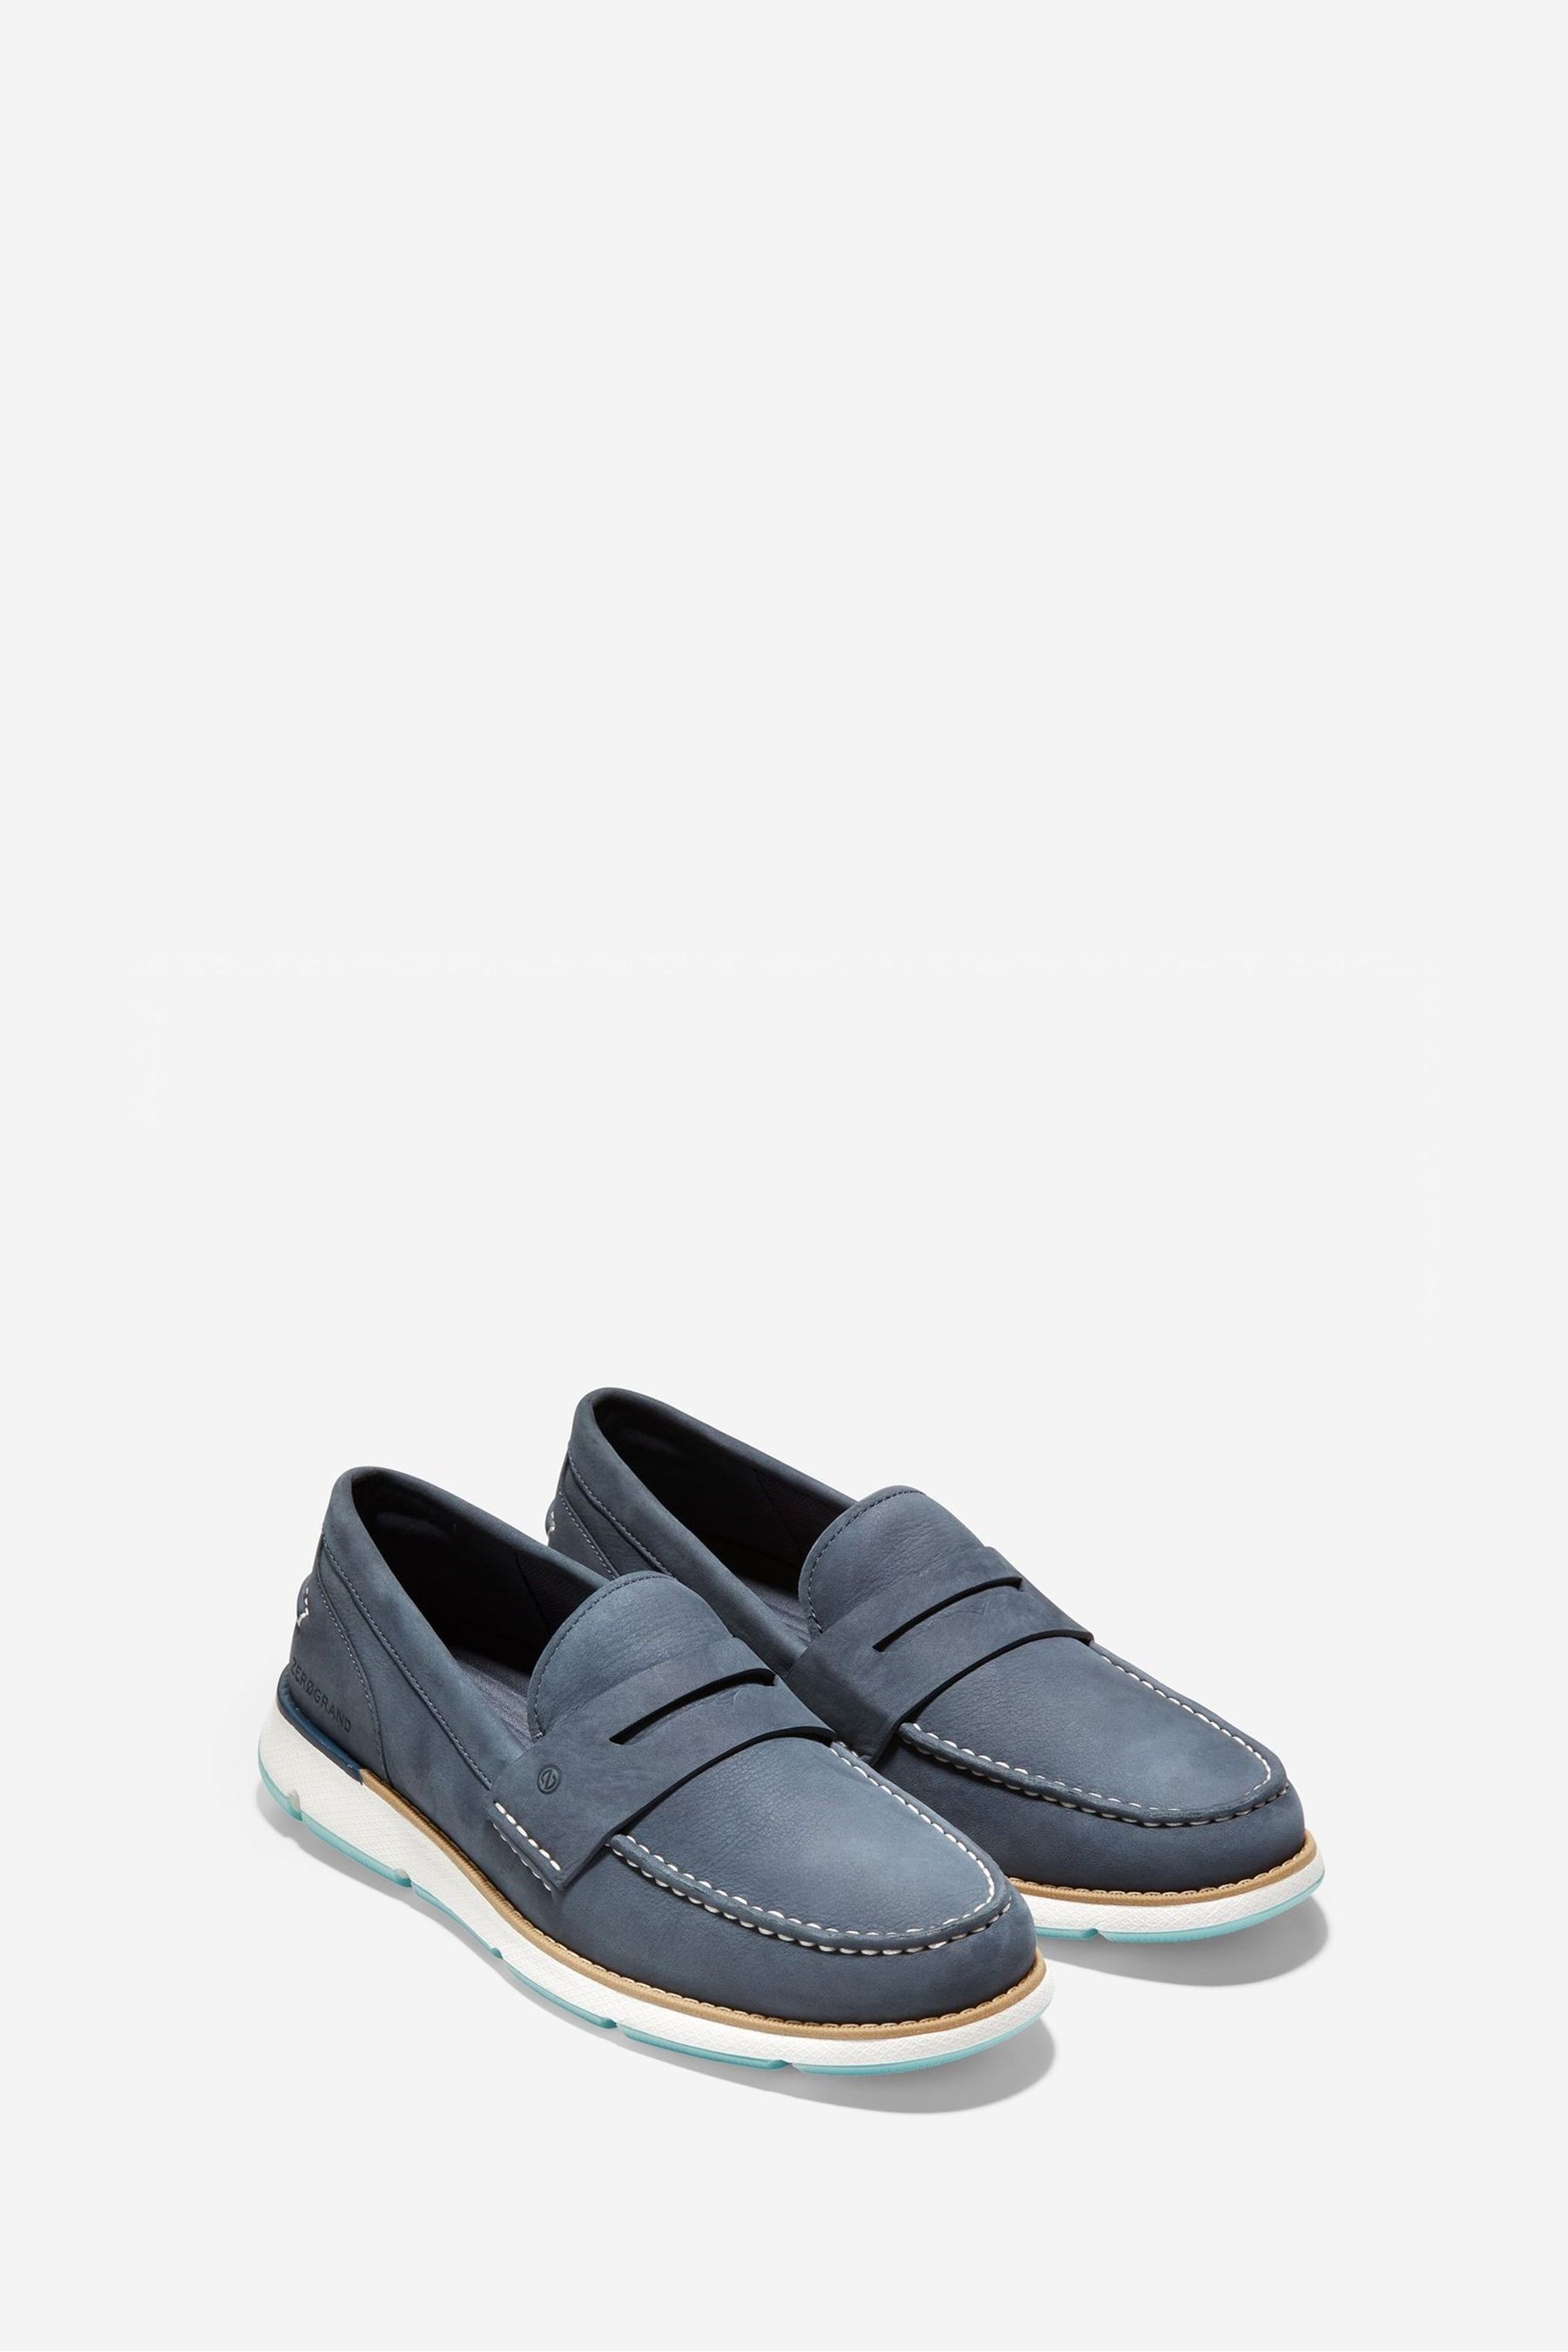 Buy Cole Haan Blue 4.ZEROGRAND Loafers from the Next UK online shop